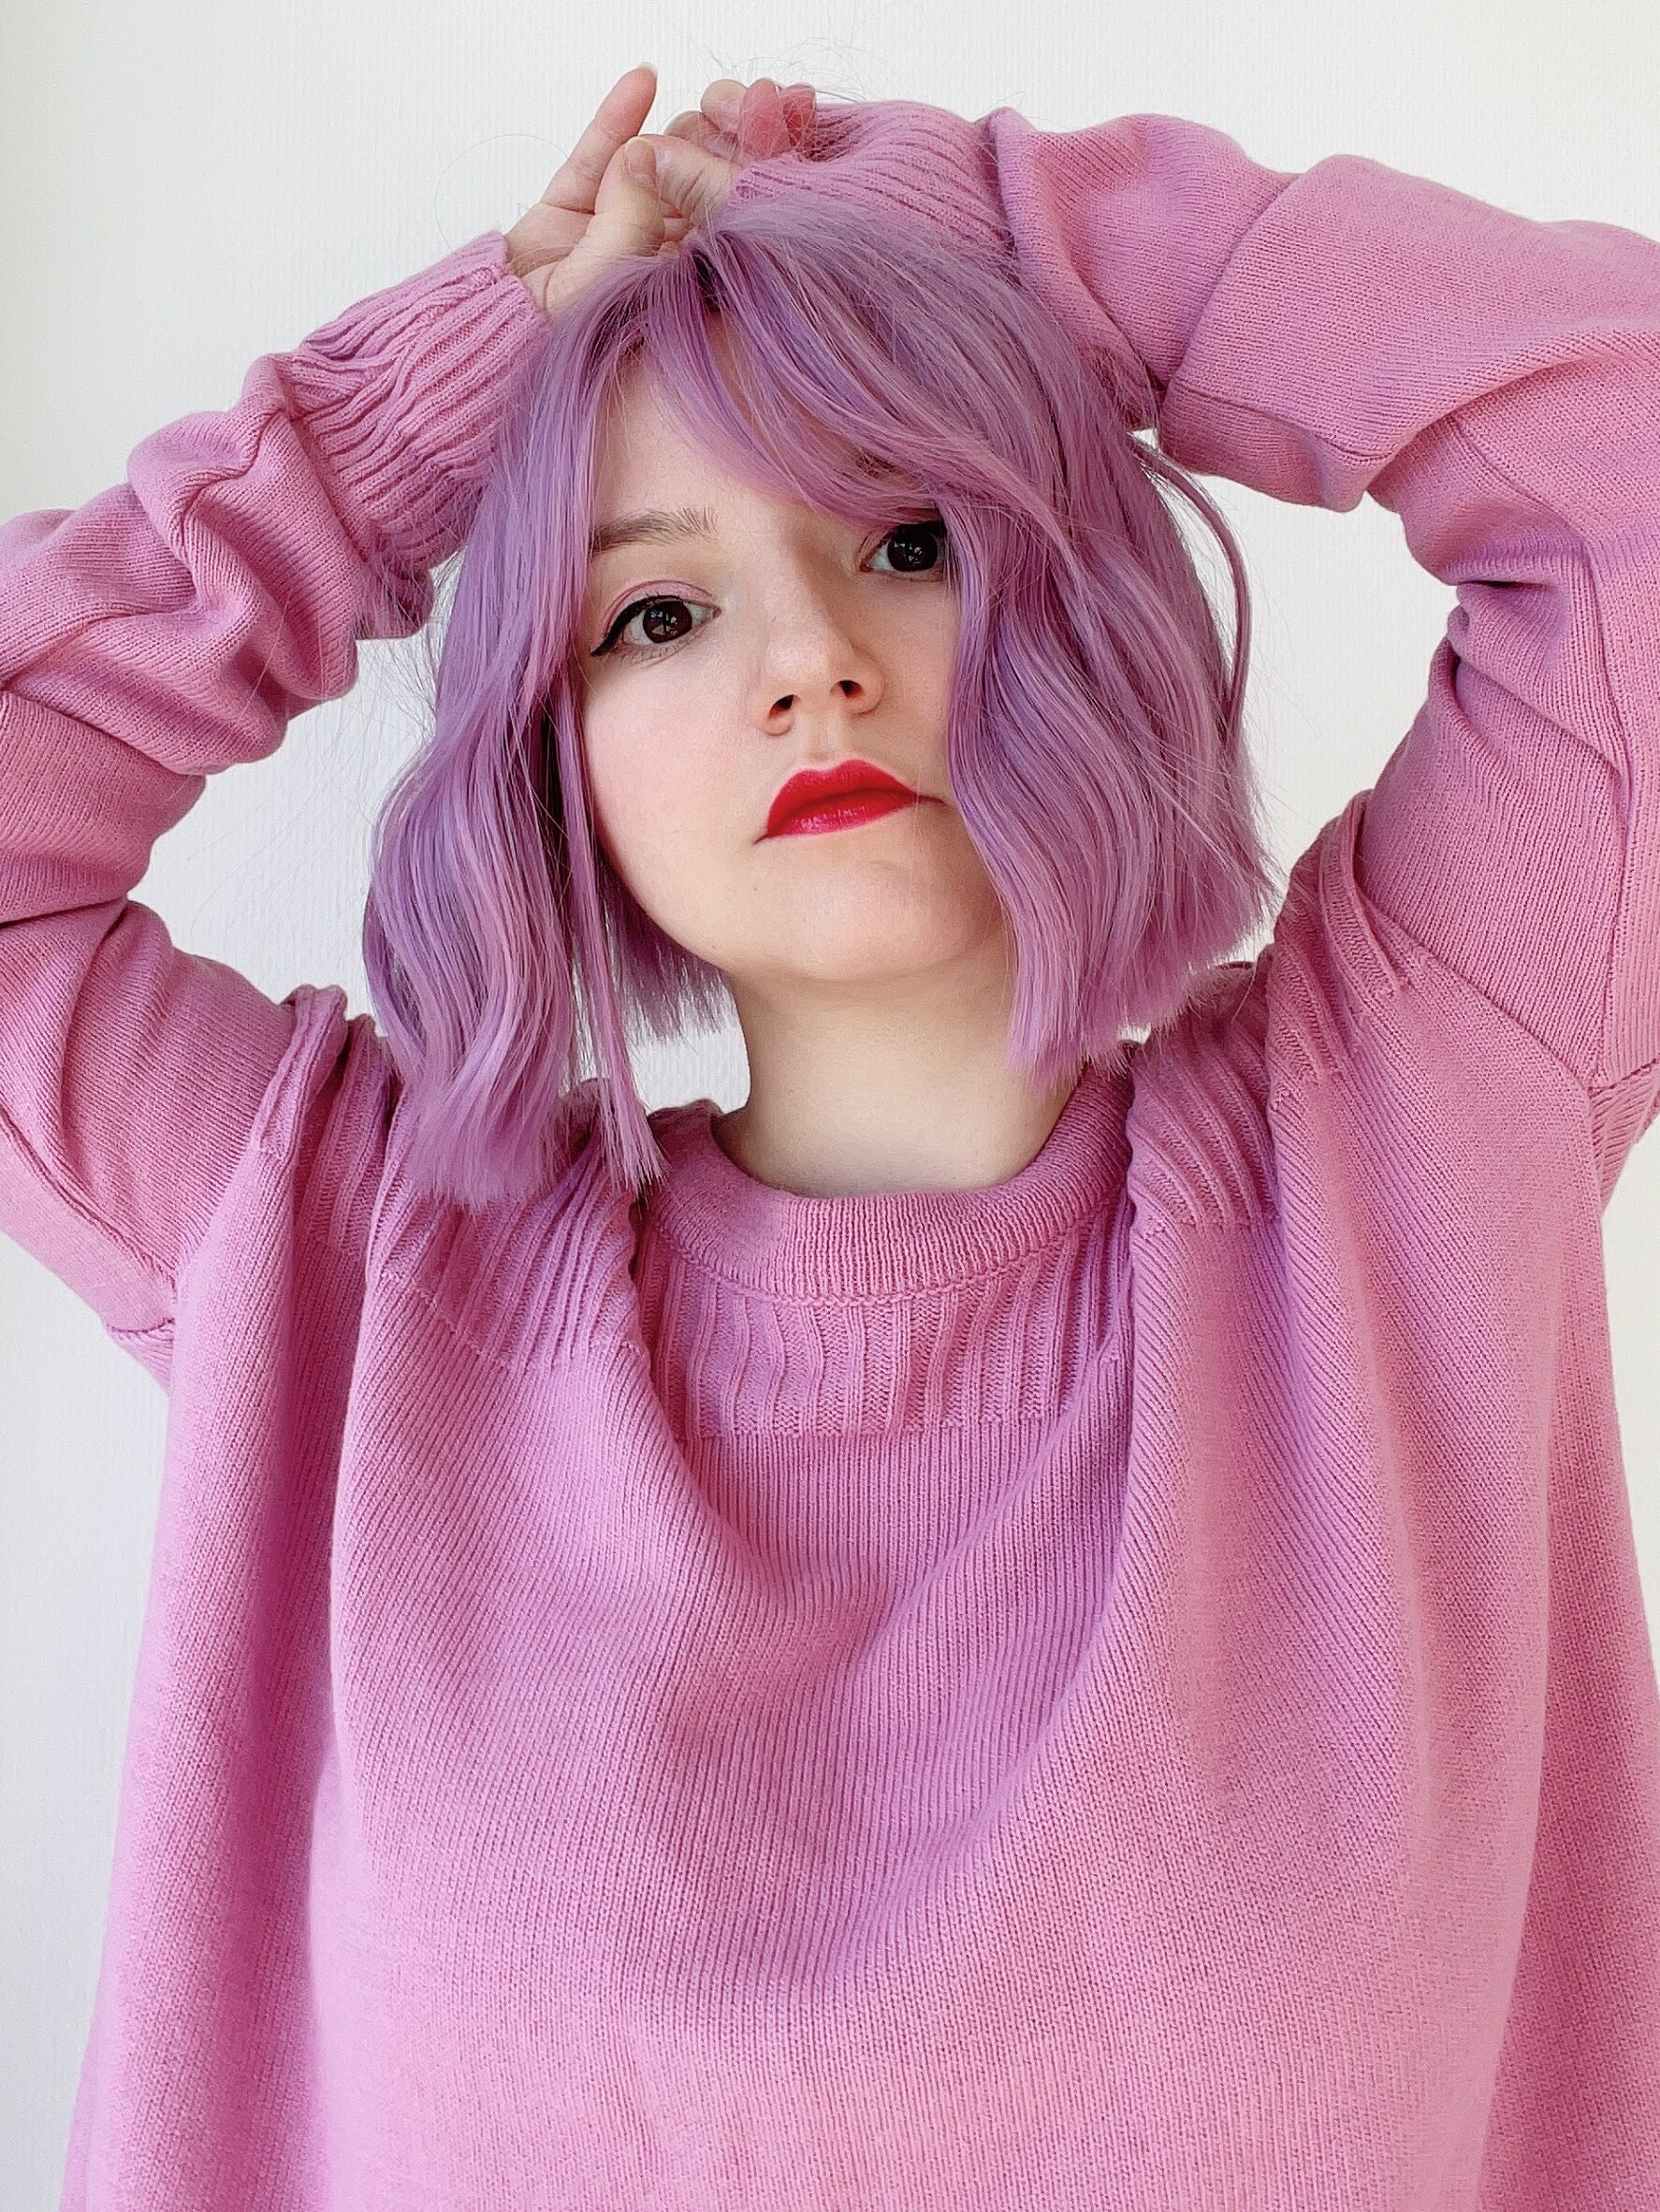 Kawaii cozy aesthetic outfits - recreate cozy aesthetic outfits